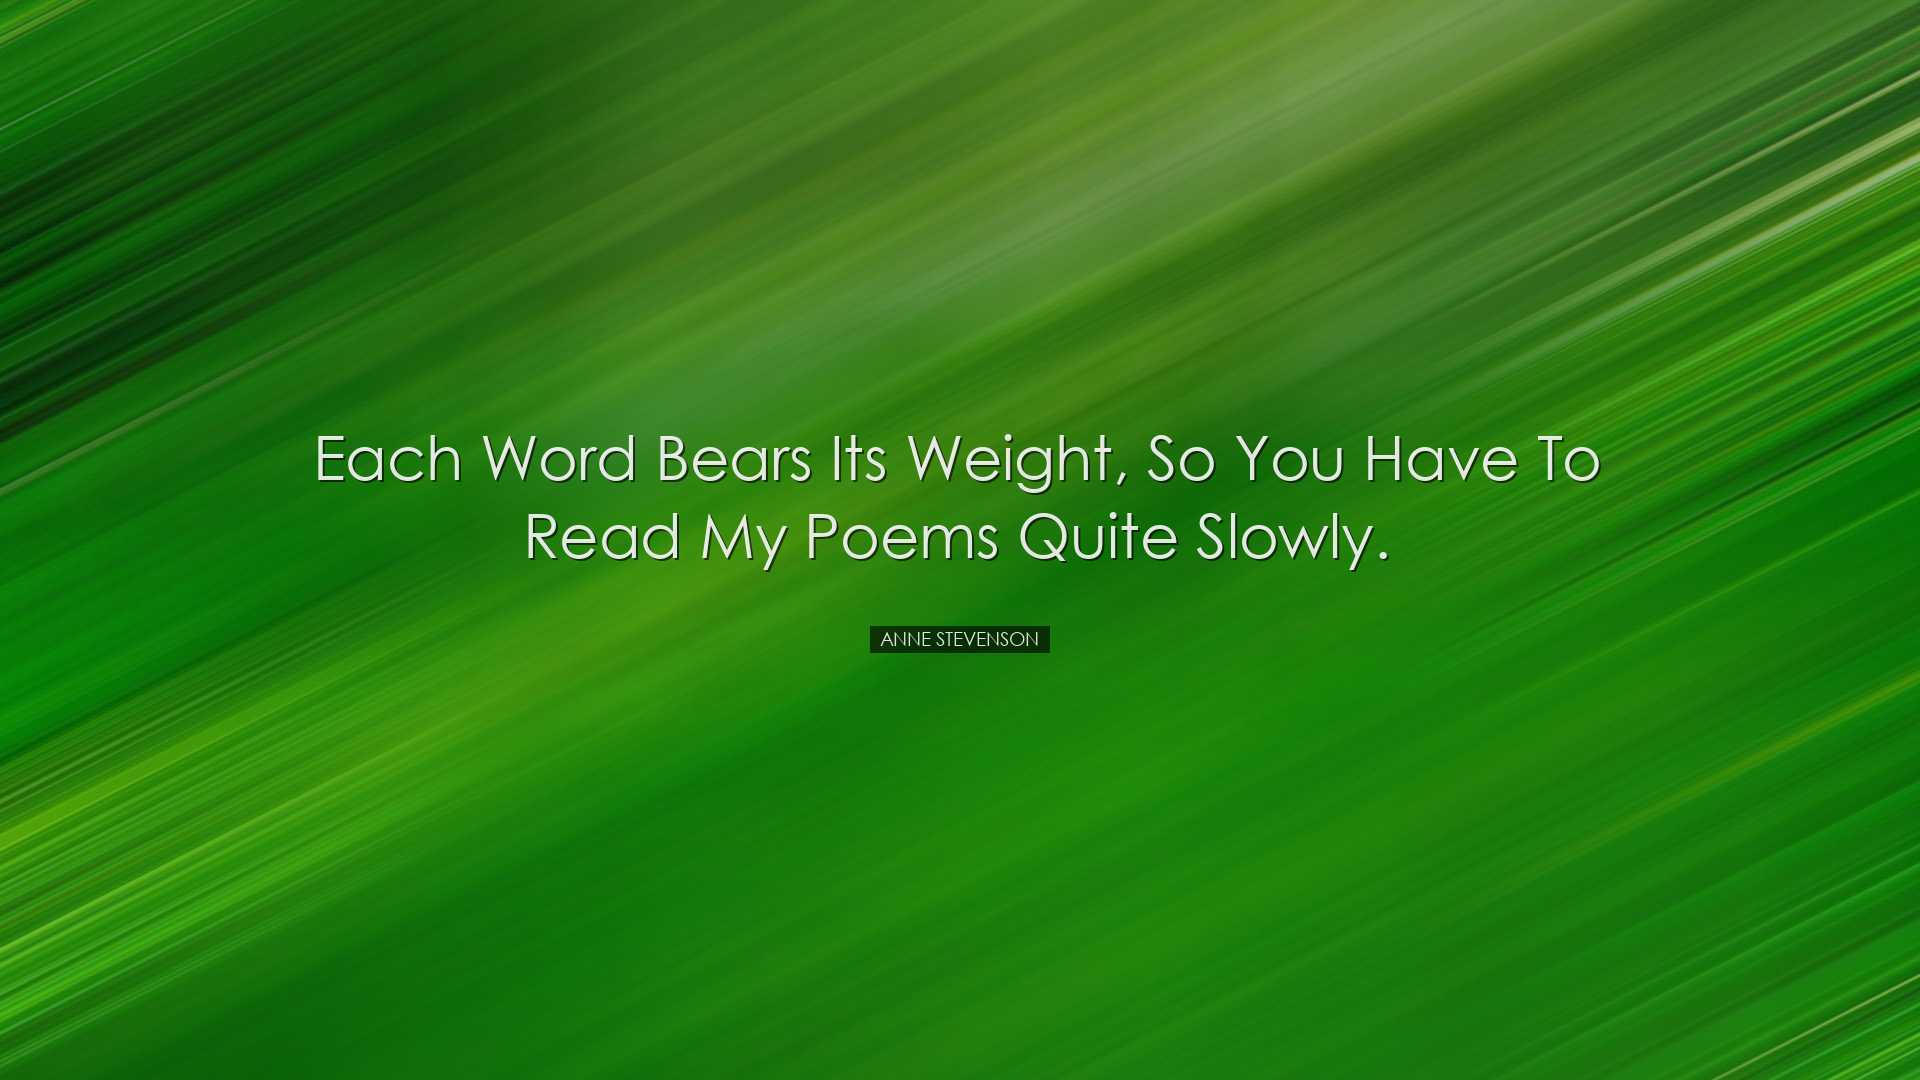 Each word bears its weight, so you have to read my poems quite slo